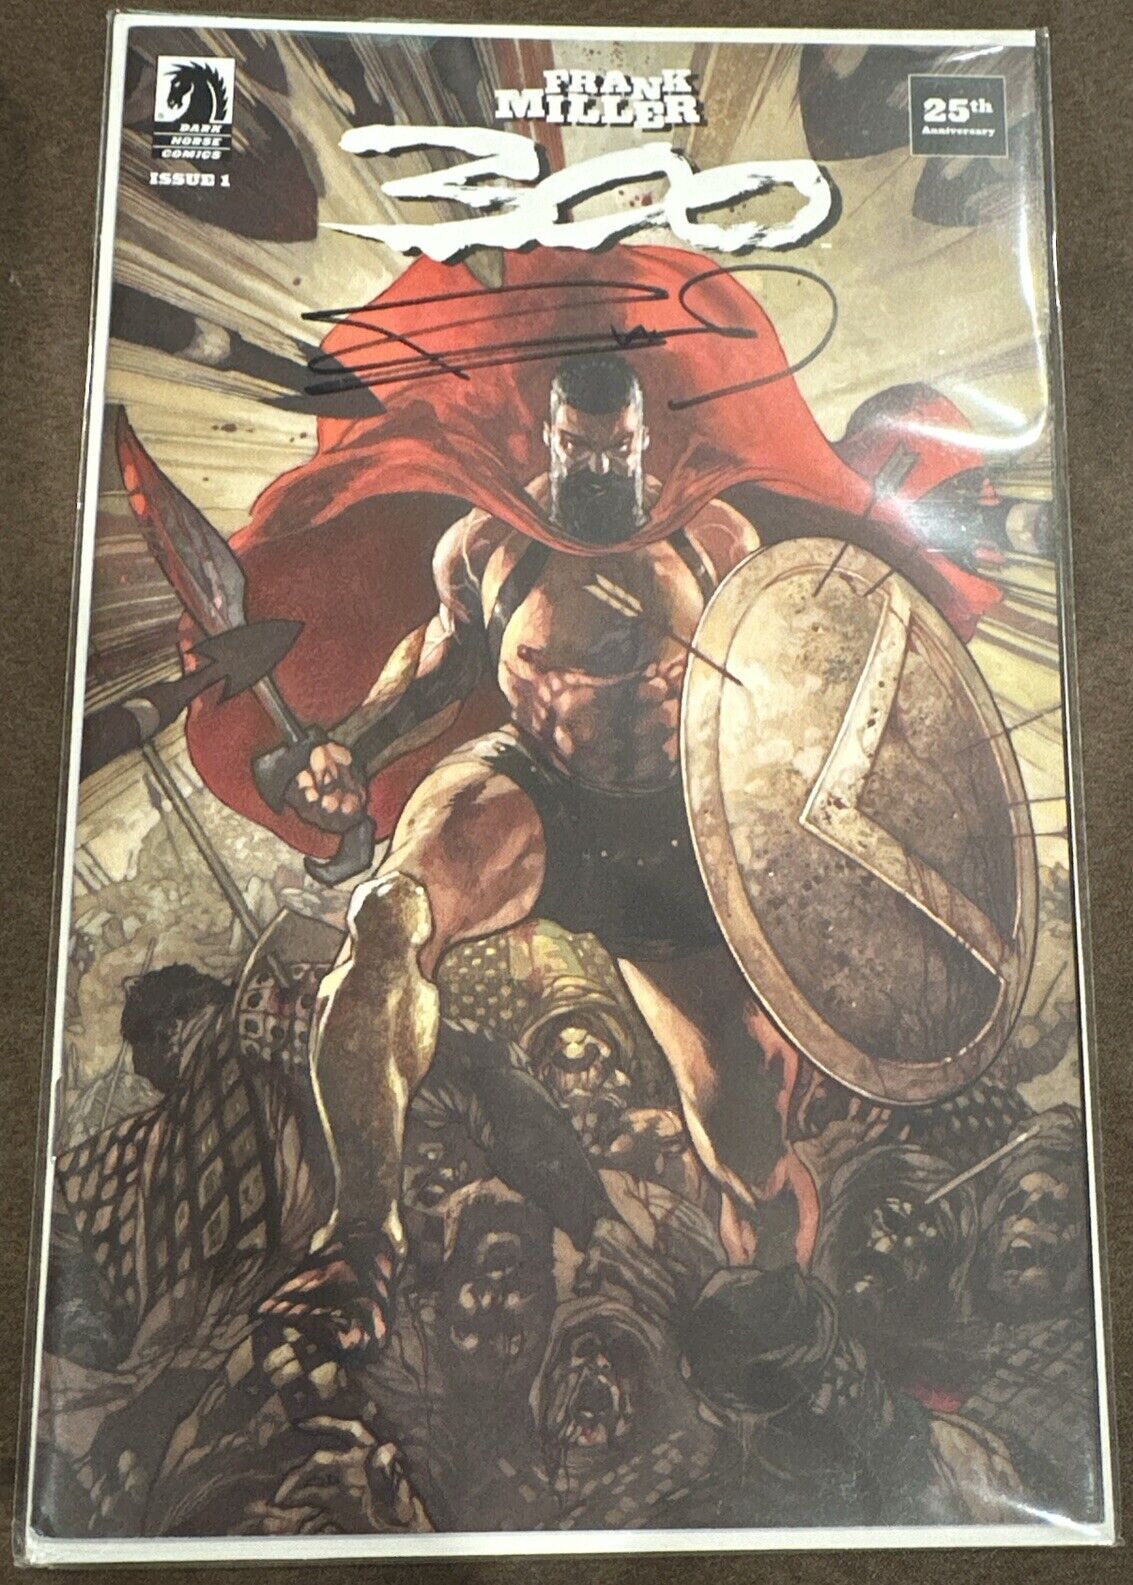 300 #1 Frank Miller 25th Anniversary-Bianchi Cover; **SIGNED BY FRANK MILLER***